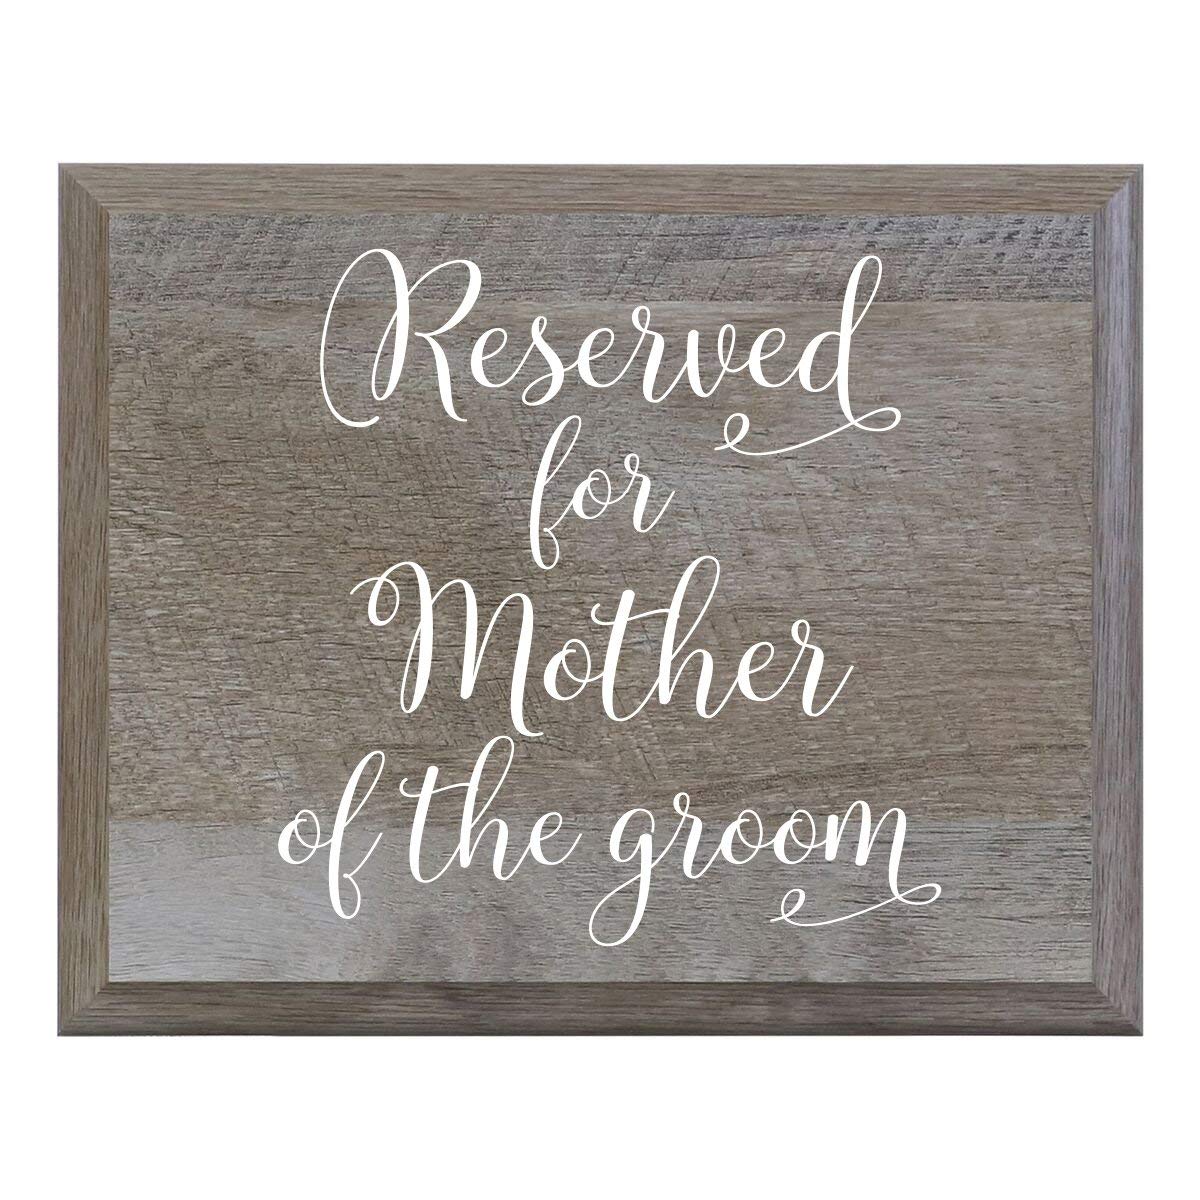 Reserved For Mother Of The Groom Decorative Wedding Party sign (8x10) - LifeSong Milestones